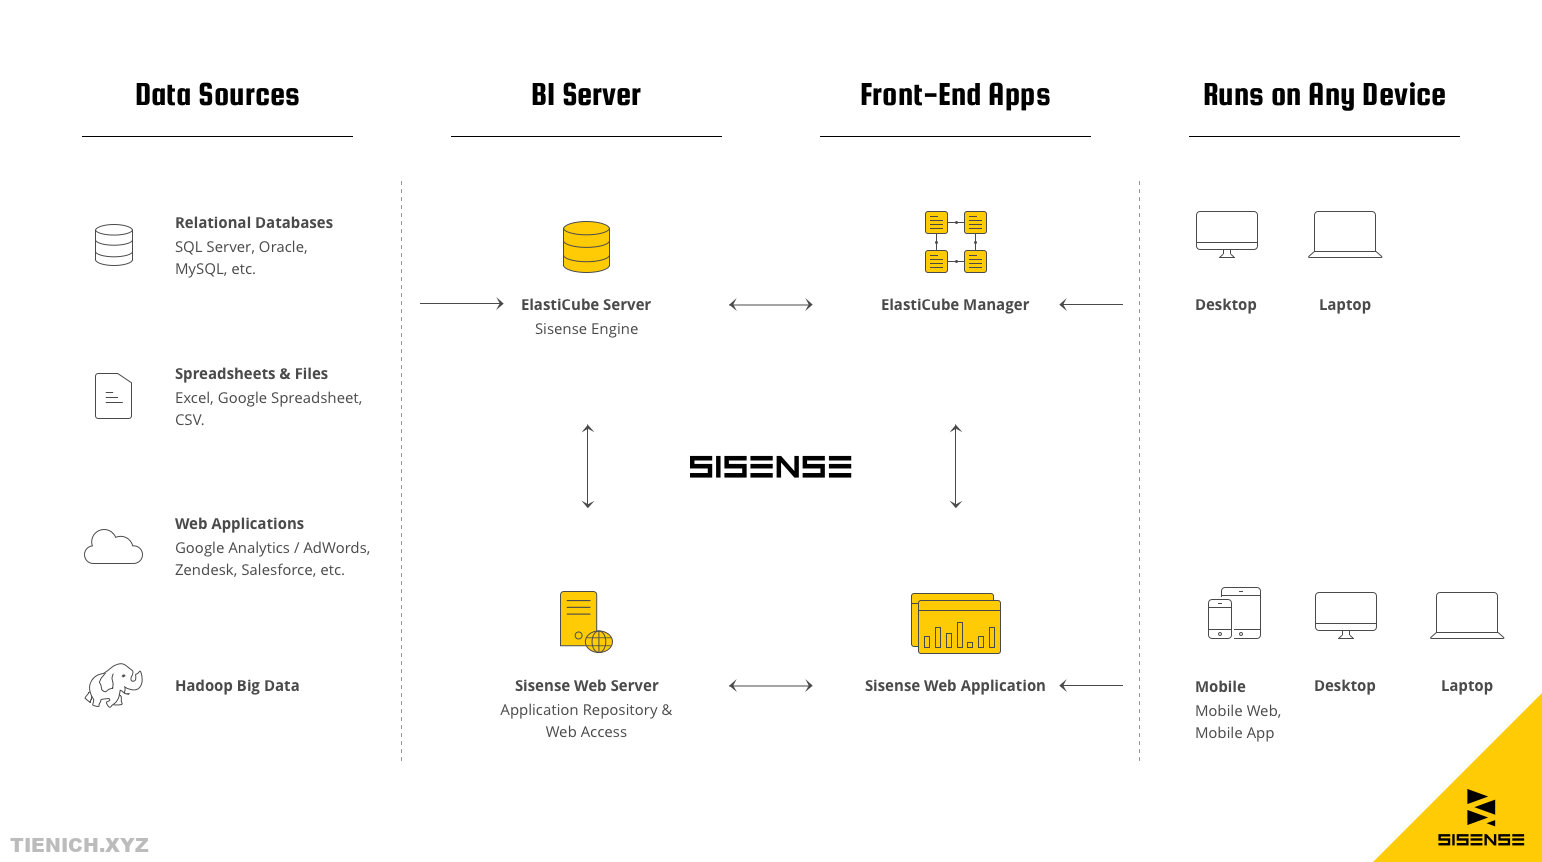 Overview about Sisense